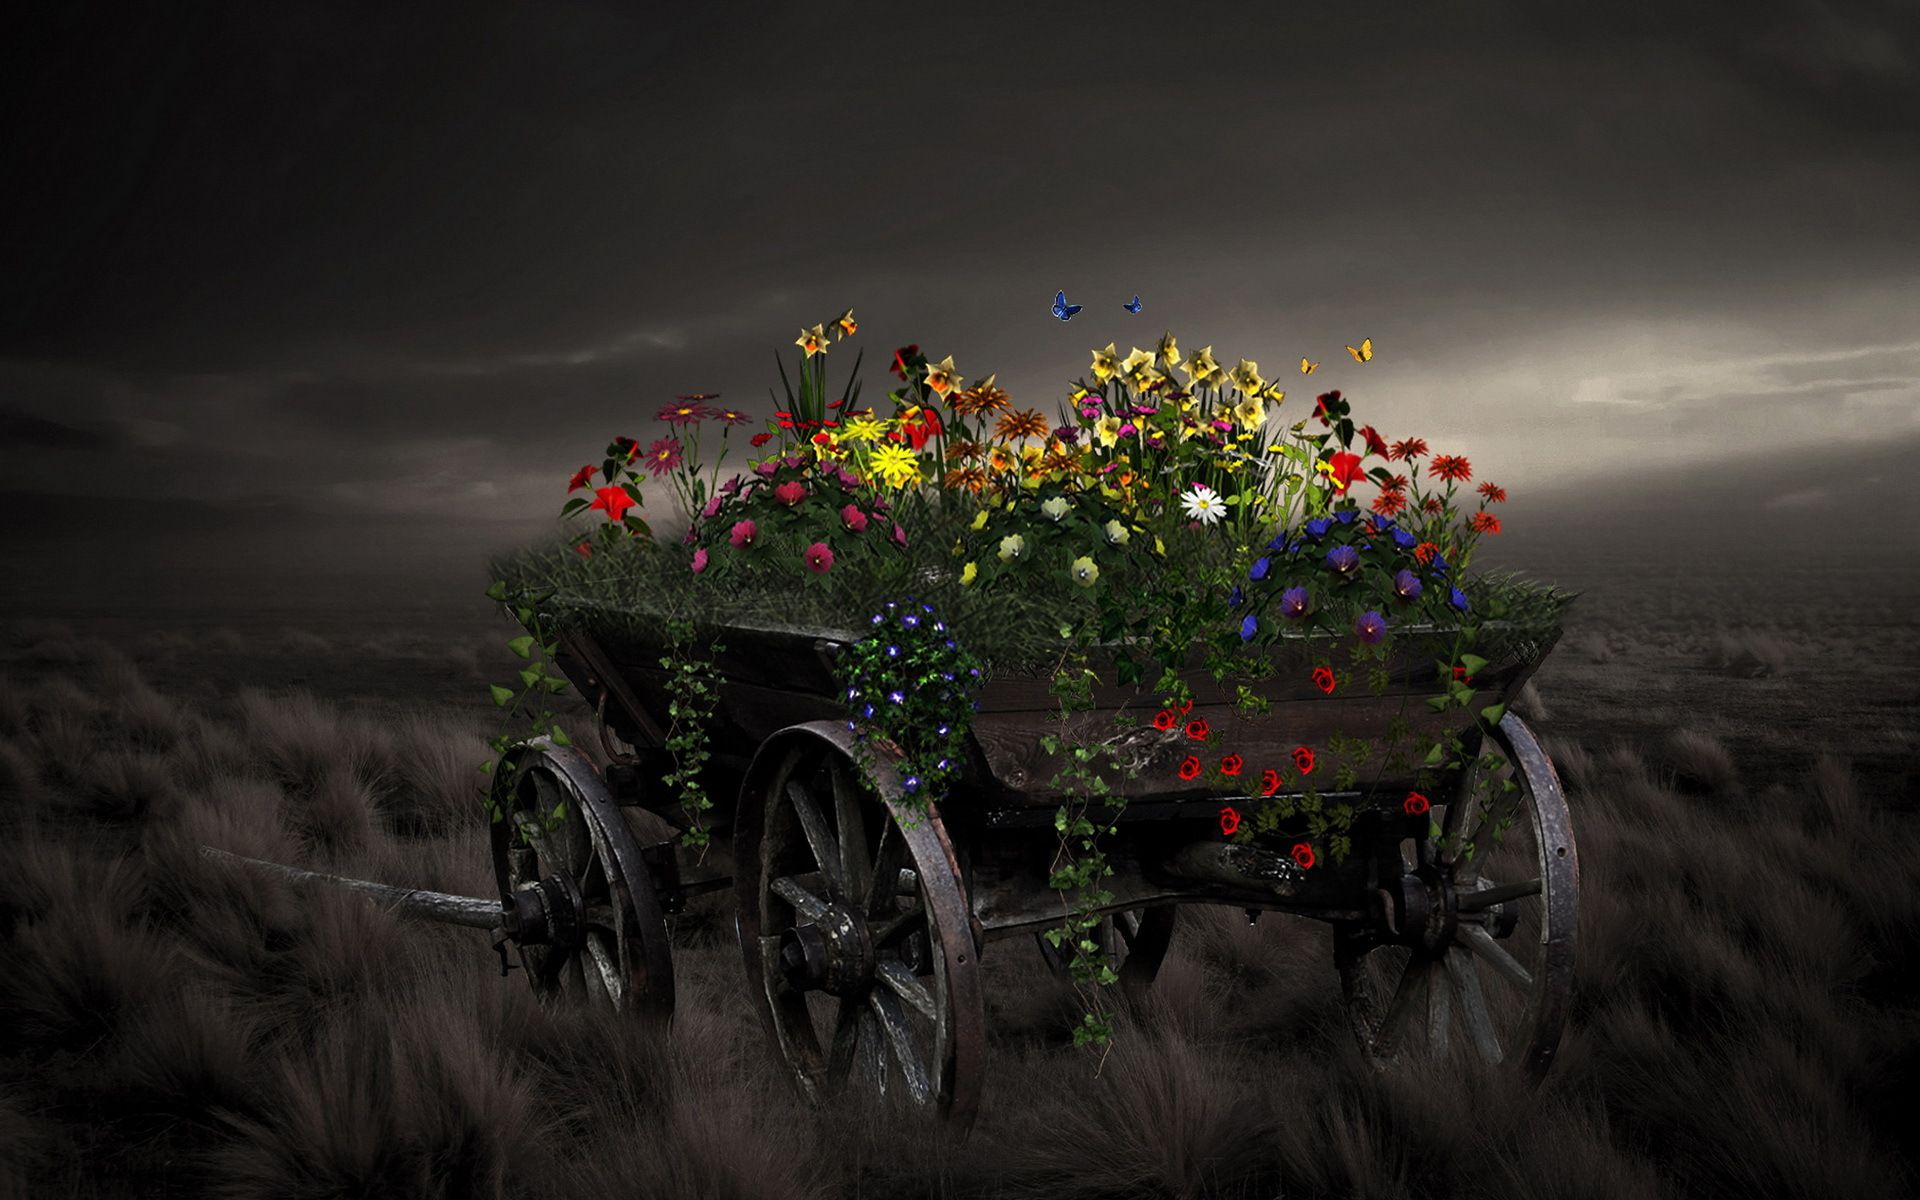 Grass, style, cart wallpaper and image, picture